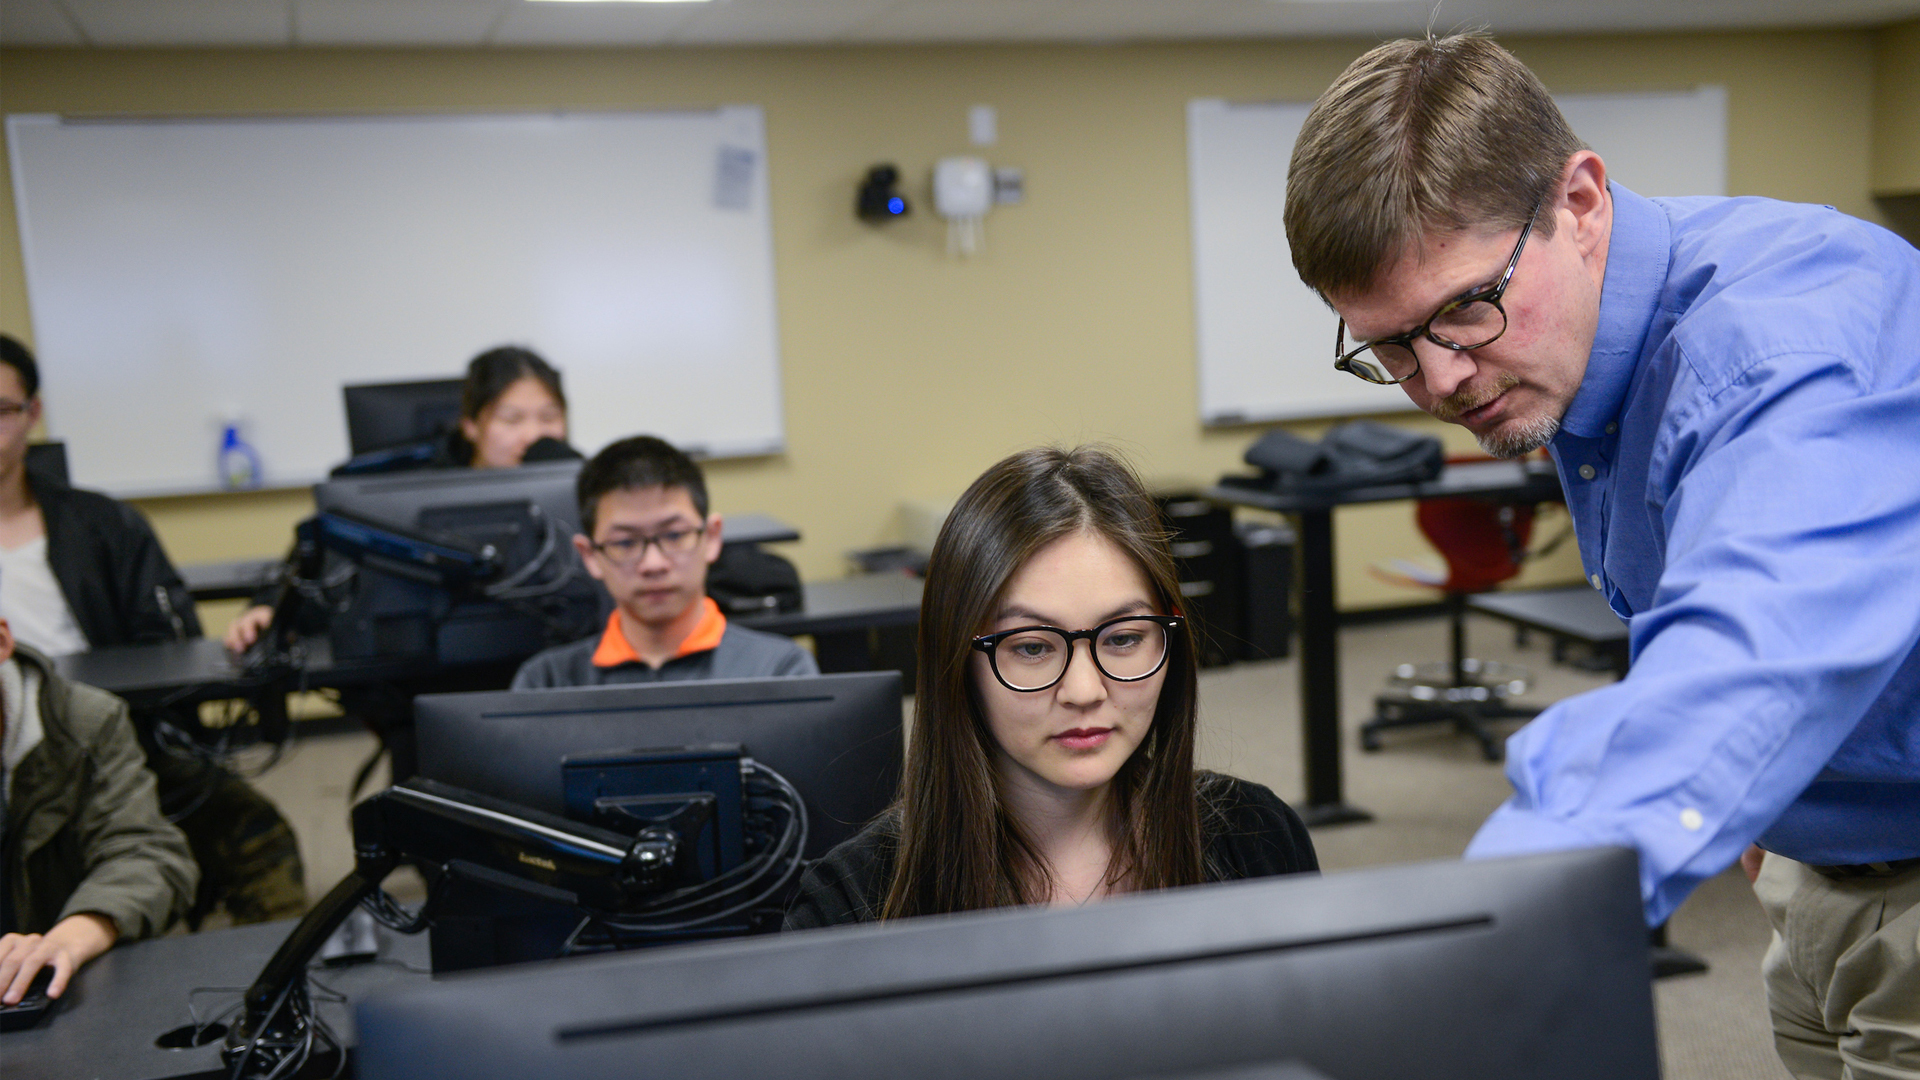 An instructor walks a young professional through a computer program in a classroom setting.